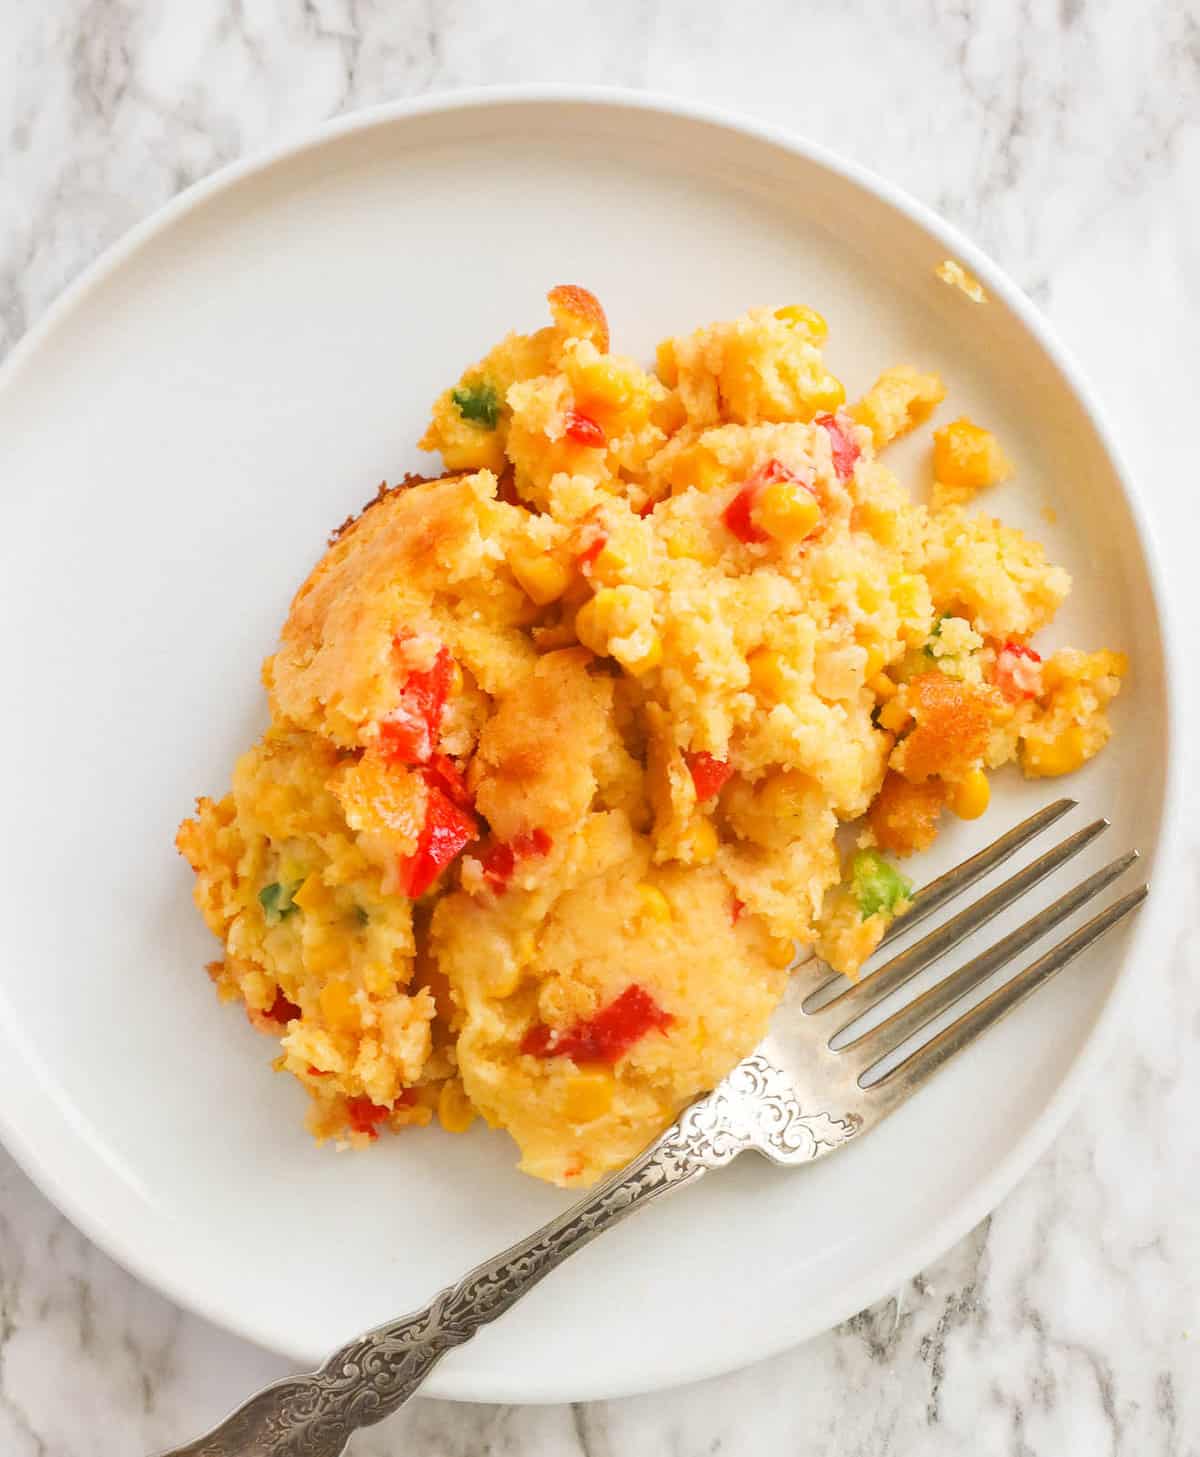 A satisfying serving of Jiffy corn casserole